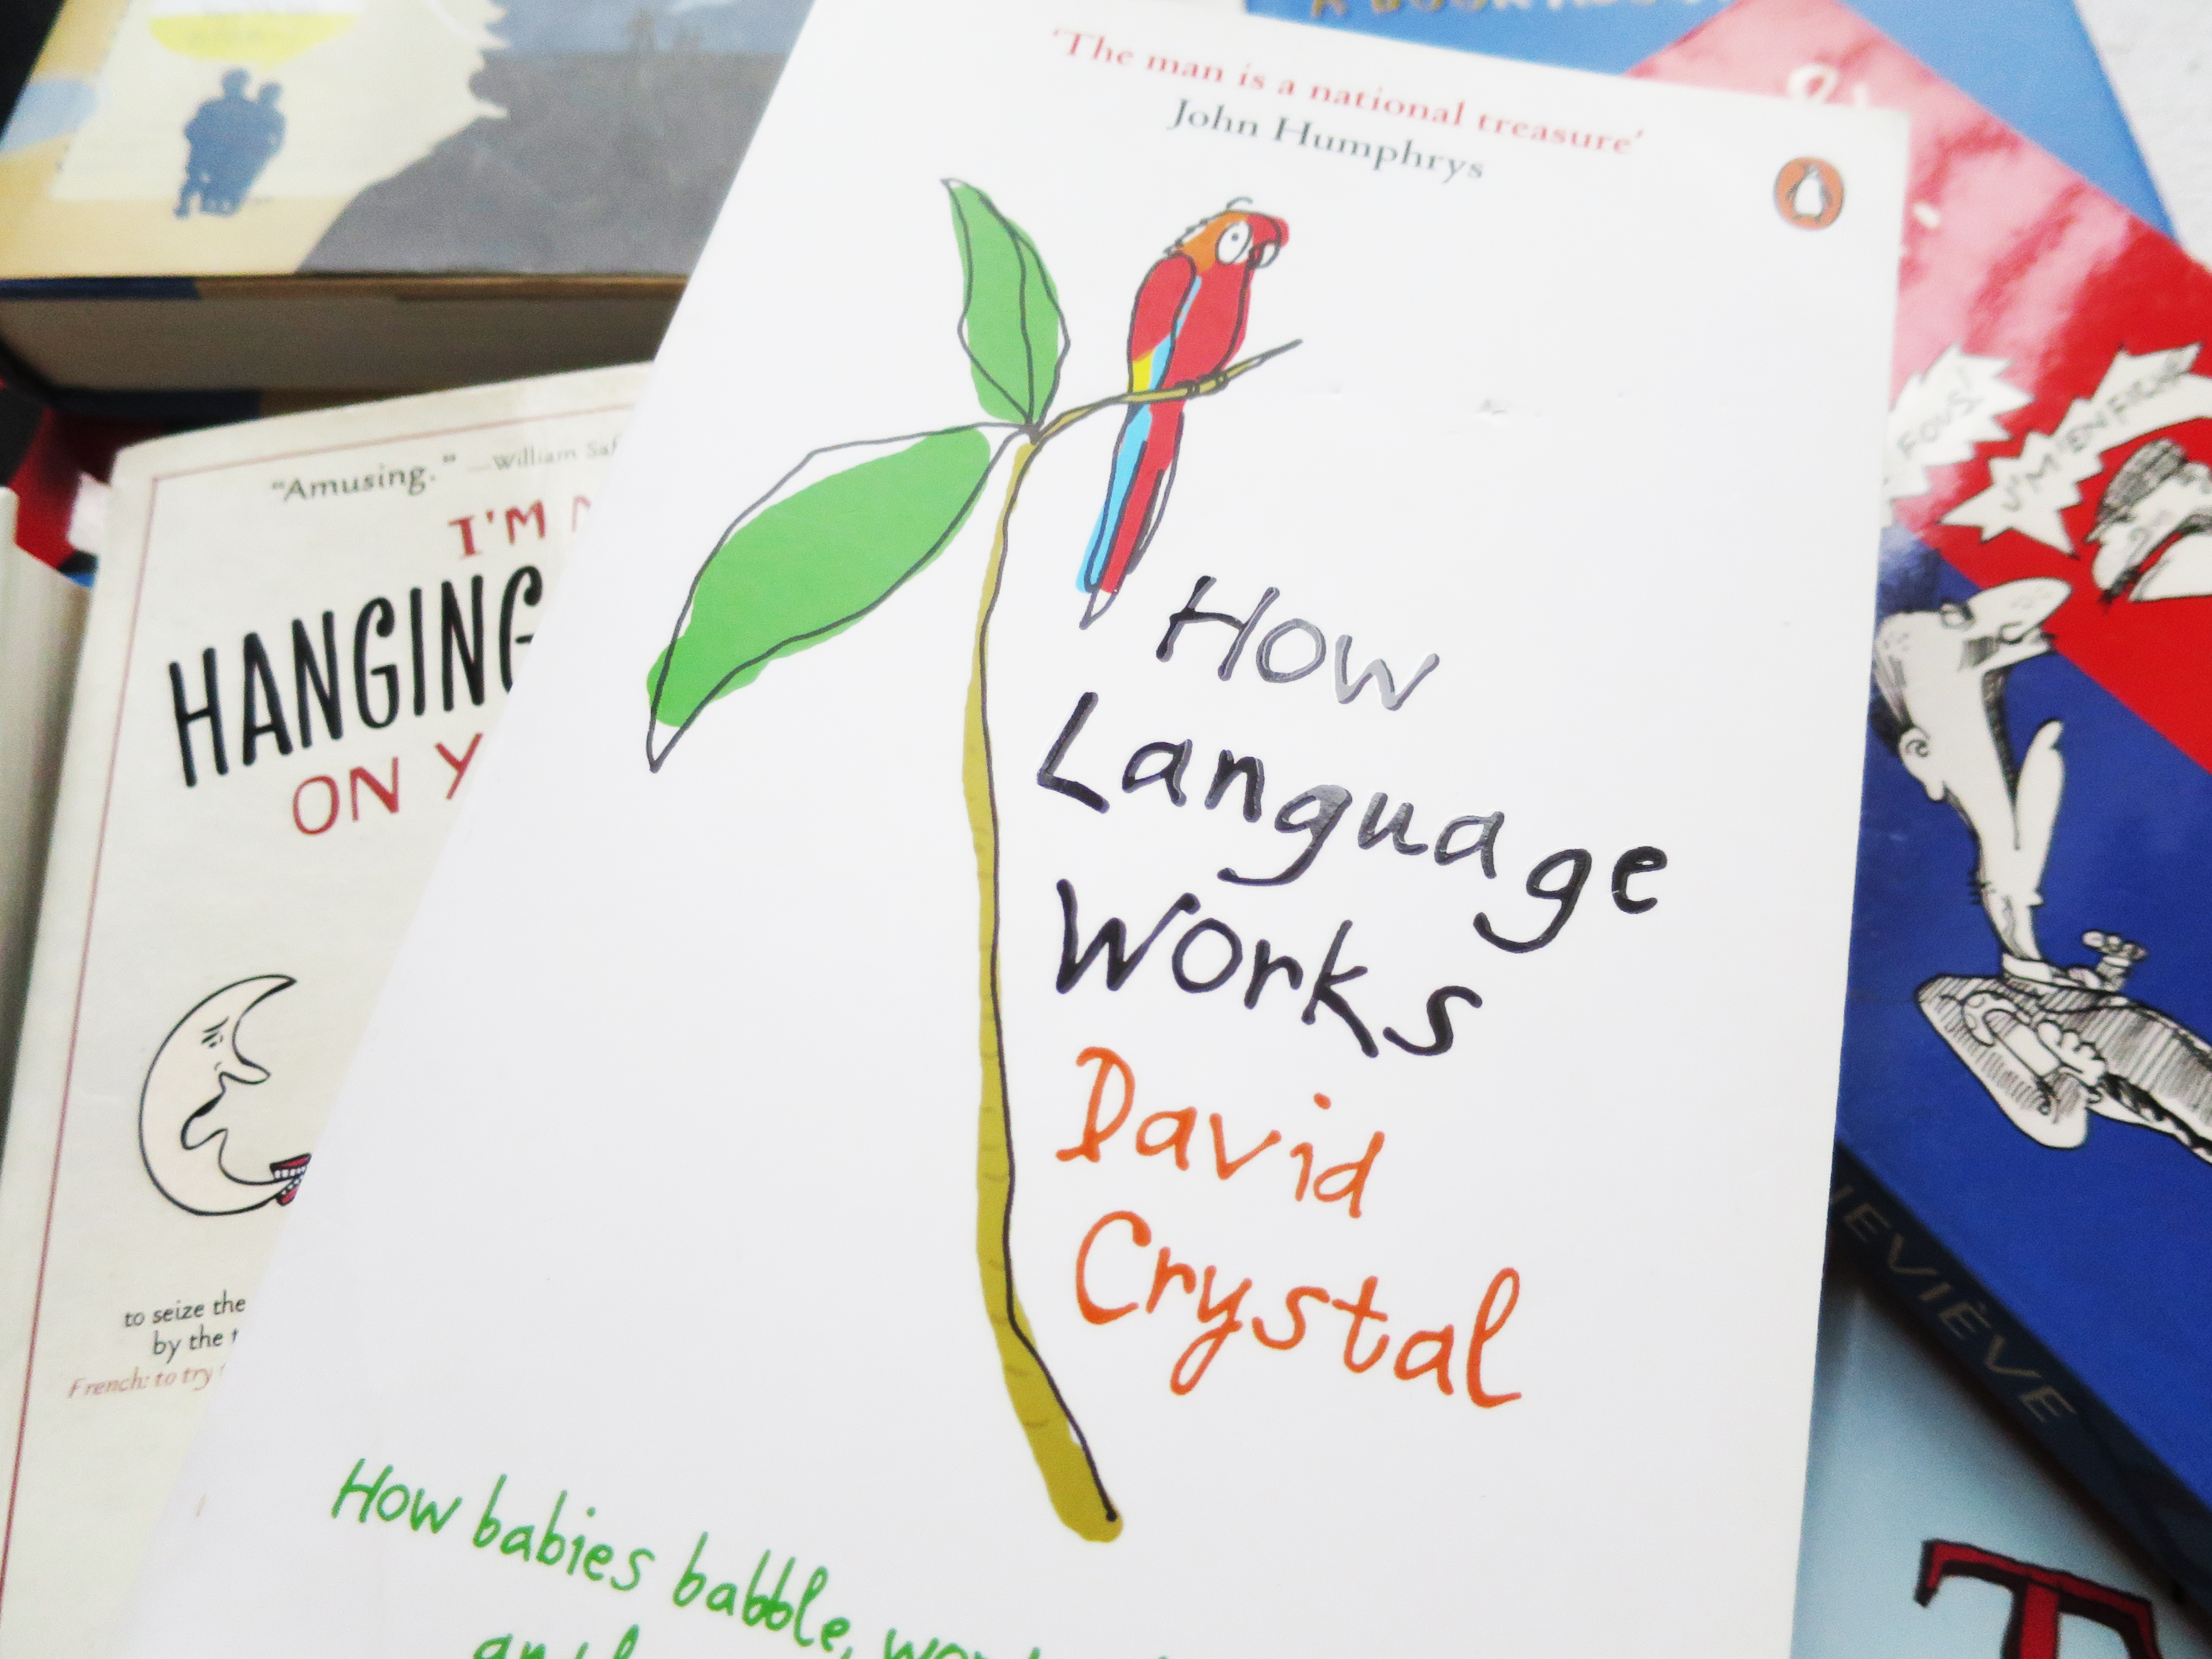 If you love languages, chances are you love reading books about language and linguistics too. Here's 10 of my favourite inspiring books about language and linguistics.